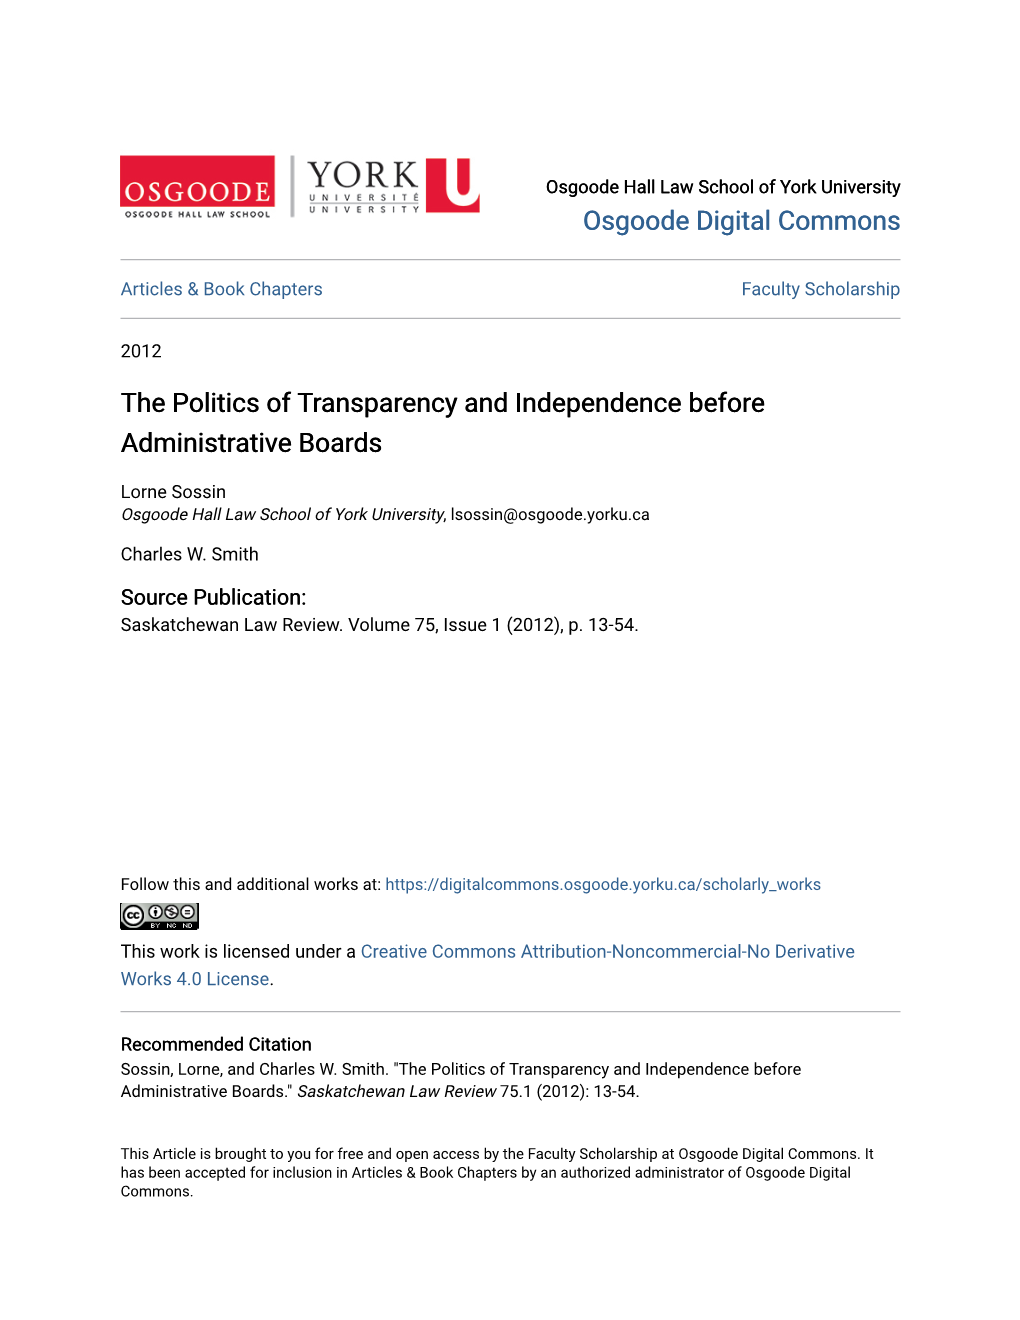 The Politics of Transparency and Independence Before Administrative Boards